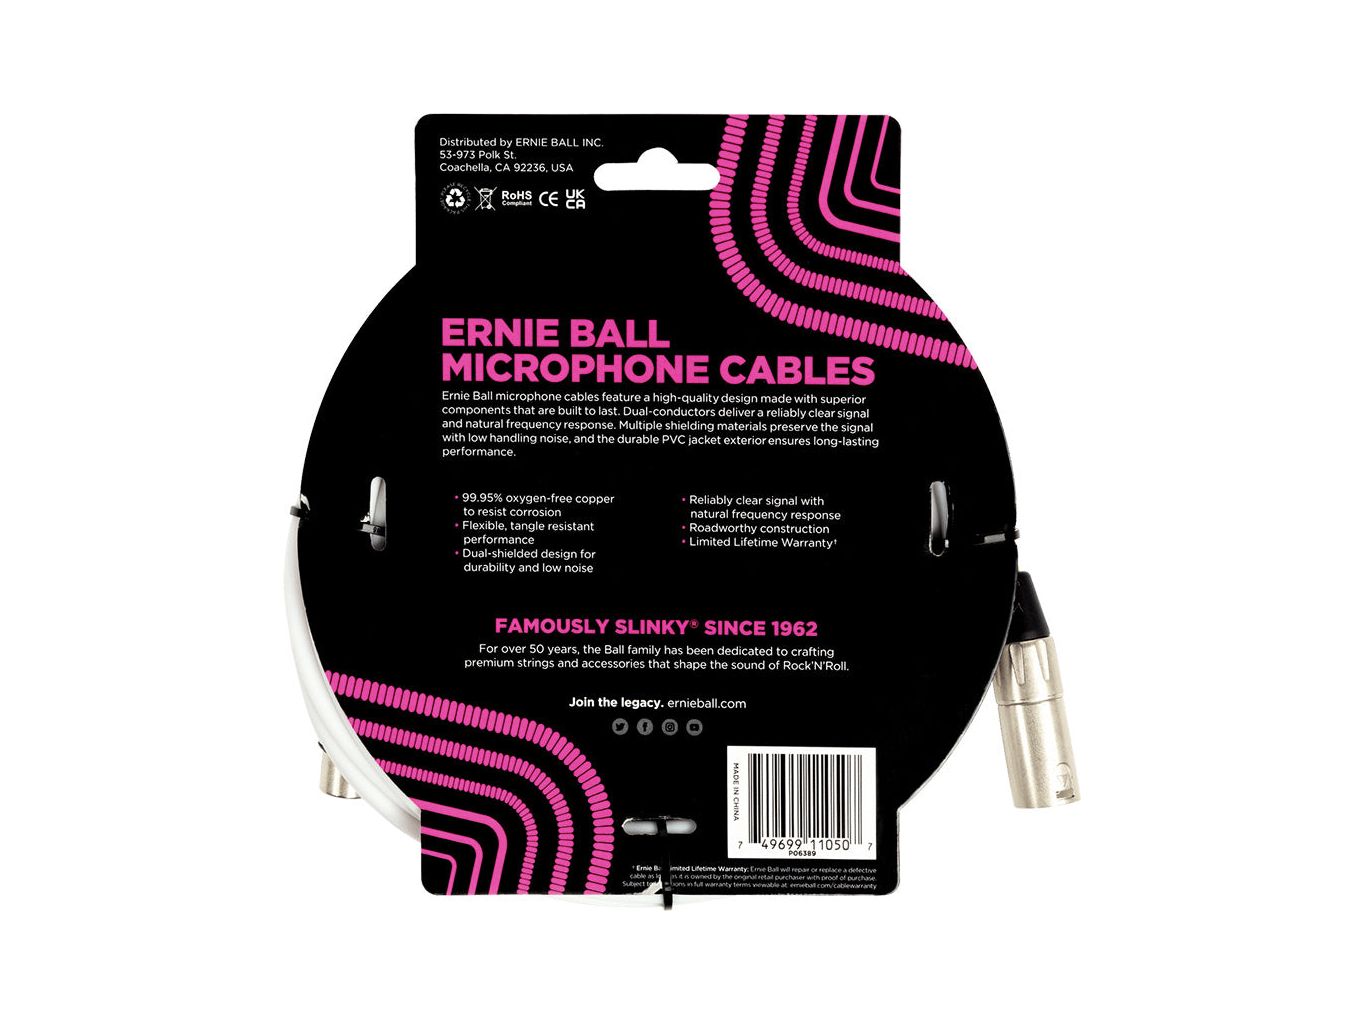 Ernie Ball 20ft XLR Microphone Cable in White